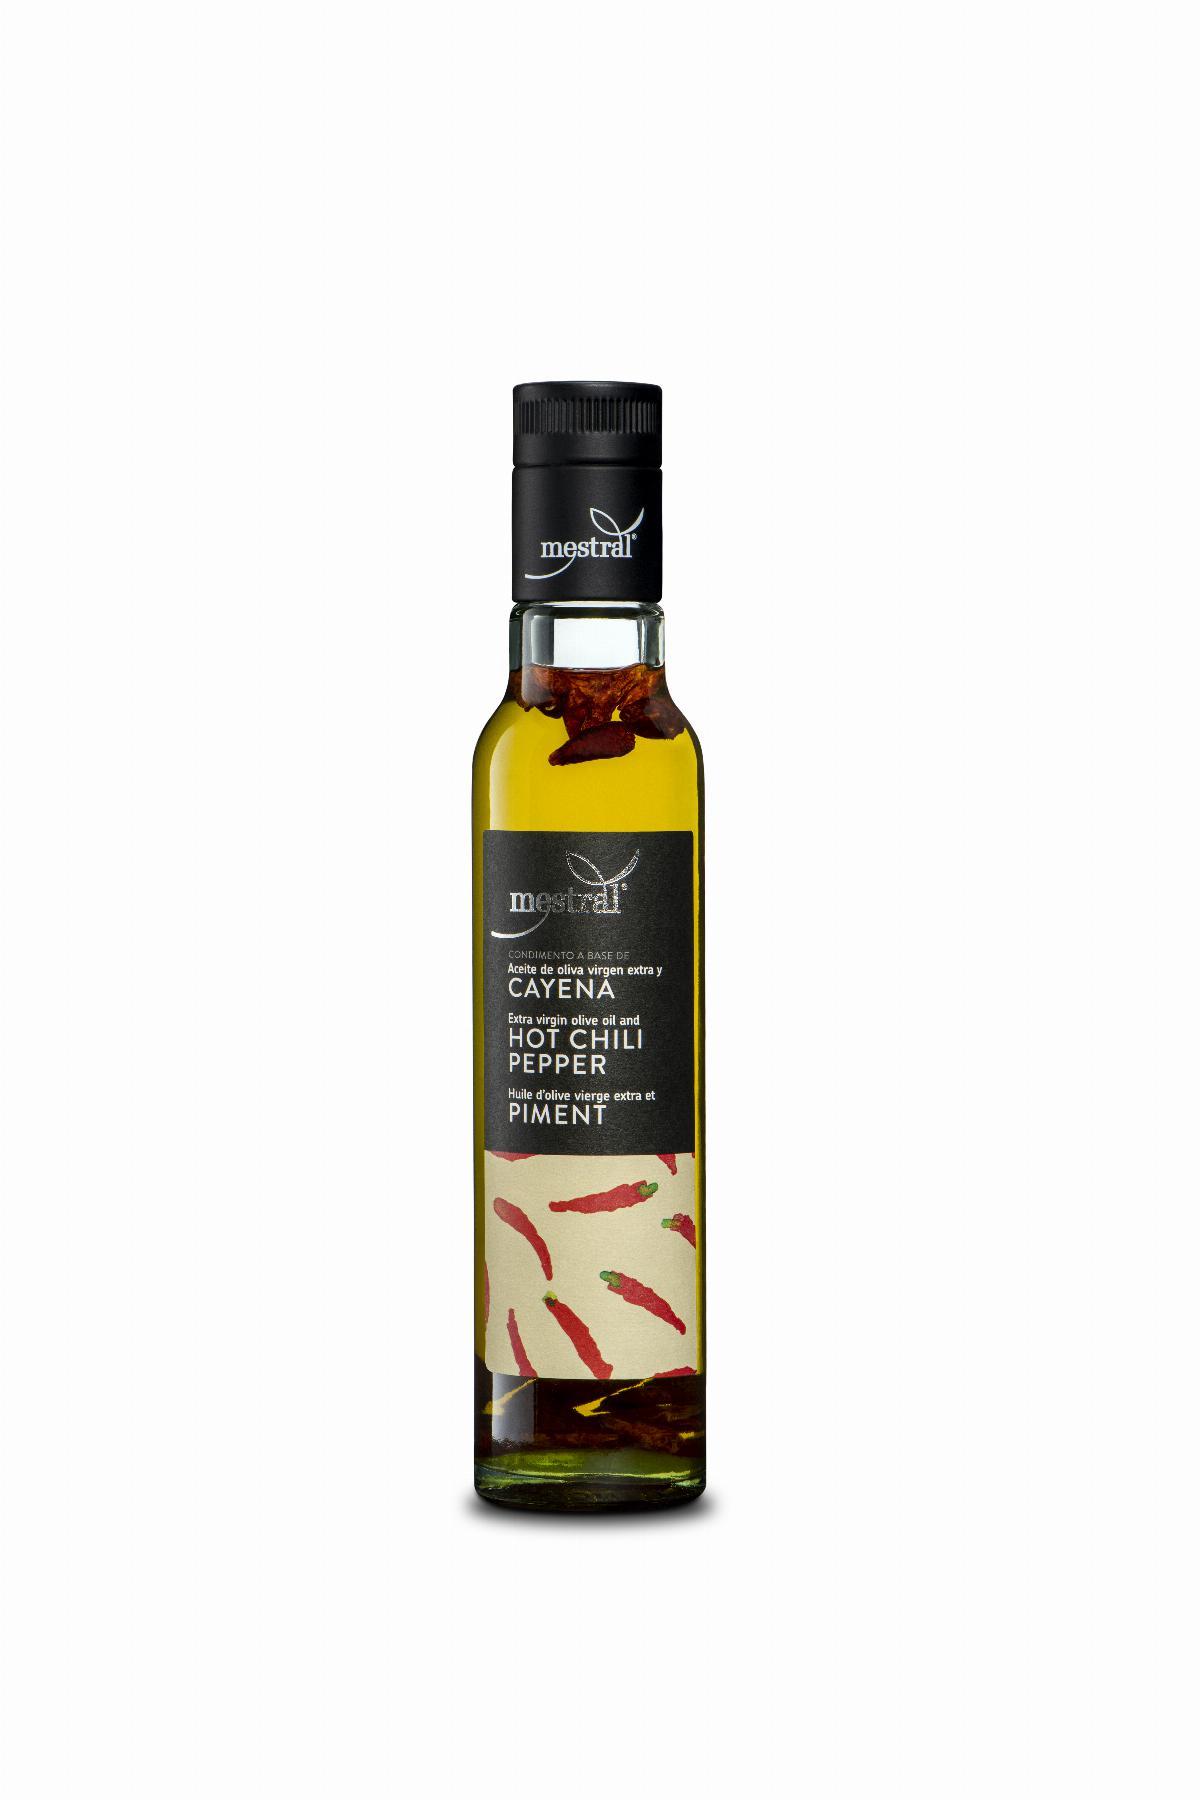 Olive Oil & Seasonings - Mestral Extra Vigin Olive Oli and Hot Chili Pepper, bot. 250ml - Mestral Cambrils